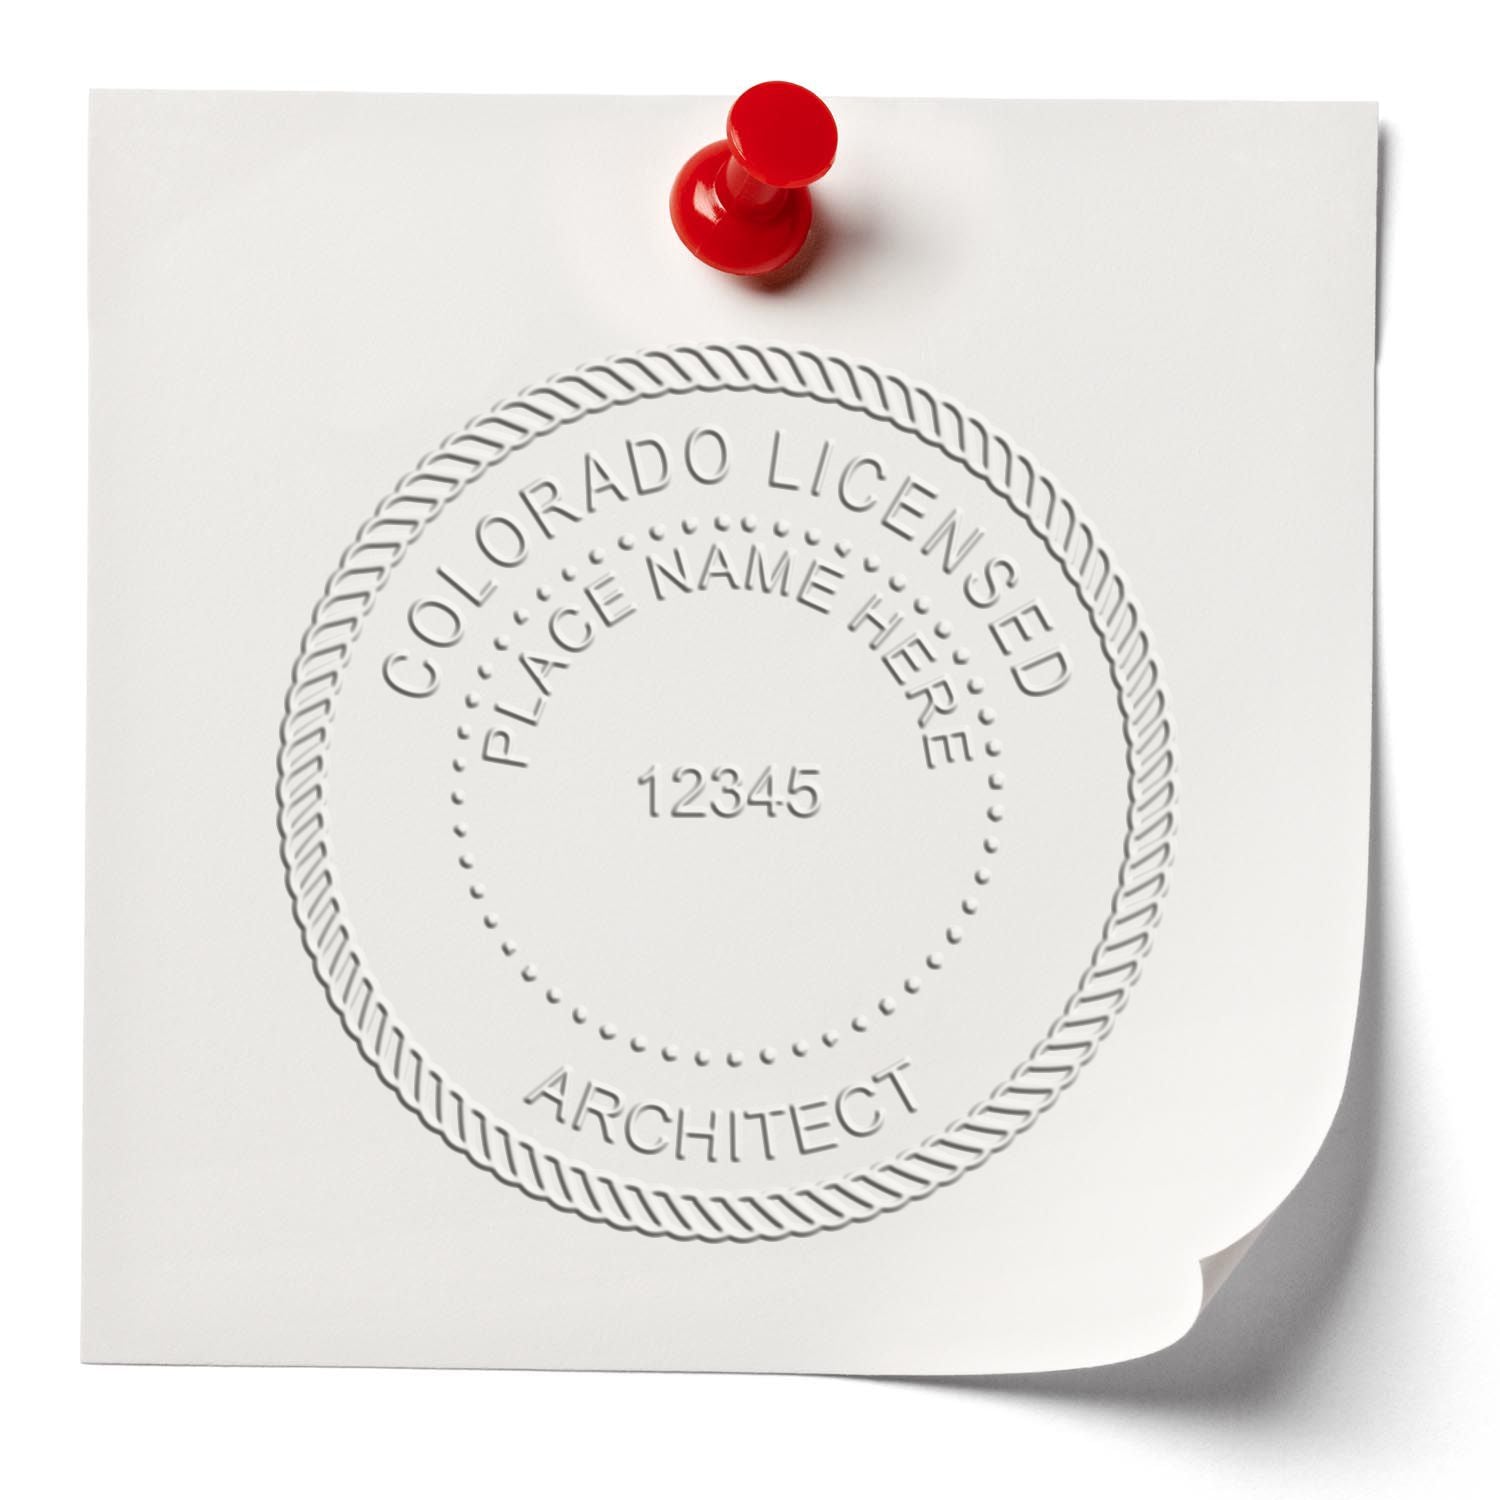 The main image for the Colorado Desk Architect Embossing Seal depicting a sample of the imprint and electronic files